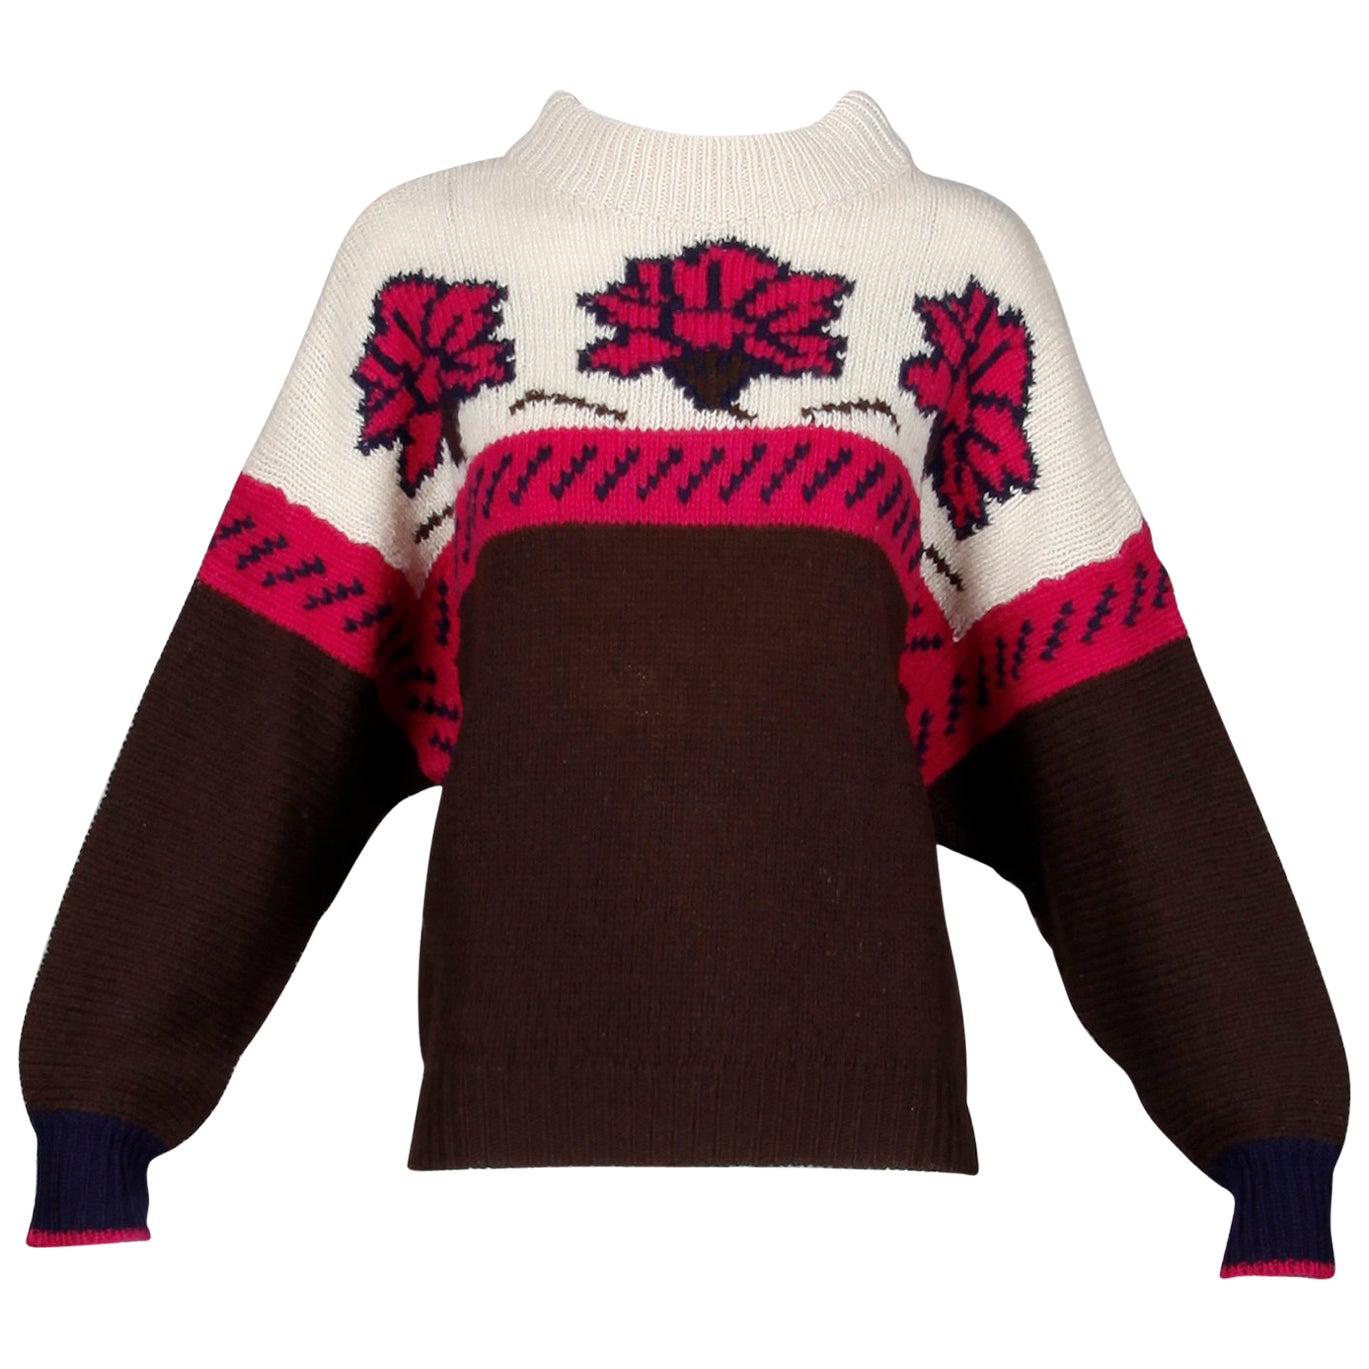 1990s Byblos Vintage 100% Wool Chunky Knit Sweater Top with Flower Design